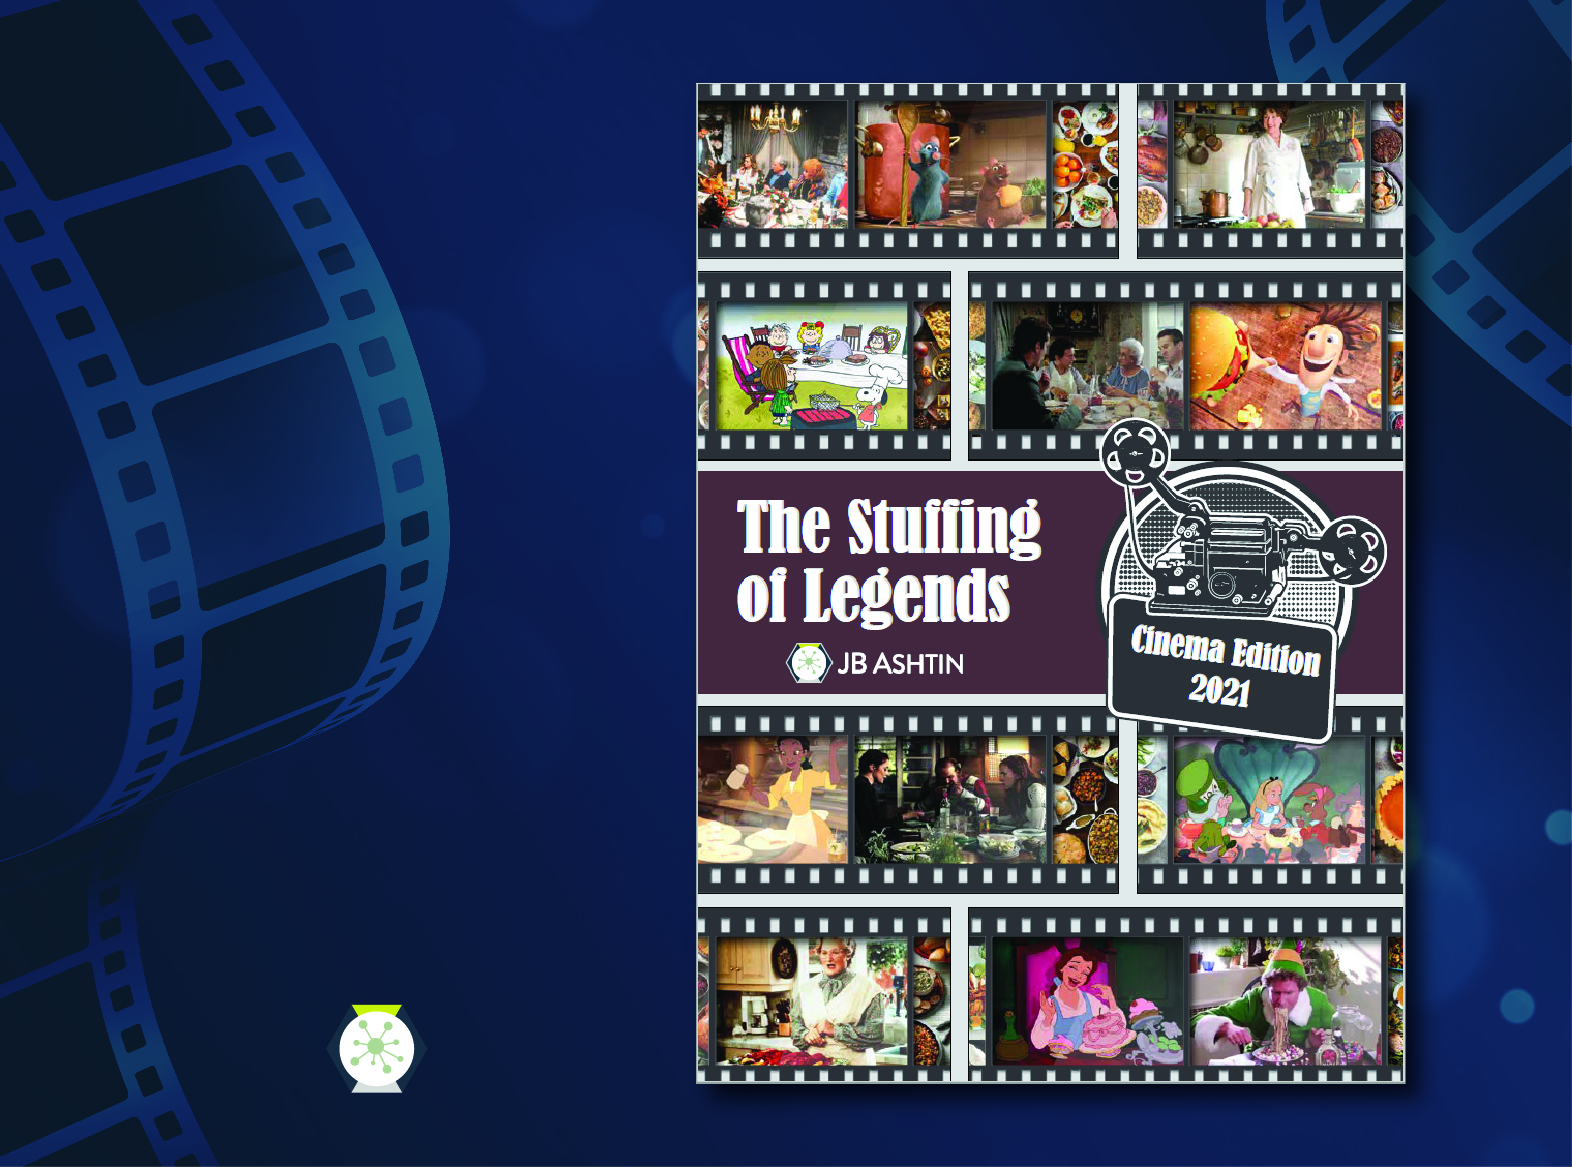 The Stuffing of Legends: Iconic Turkey Friday Collaborations – The Cinema Edition